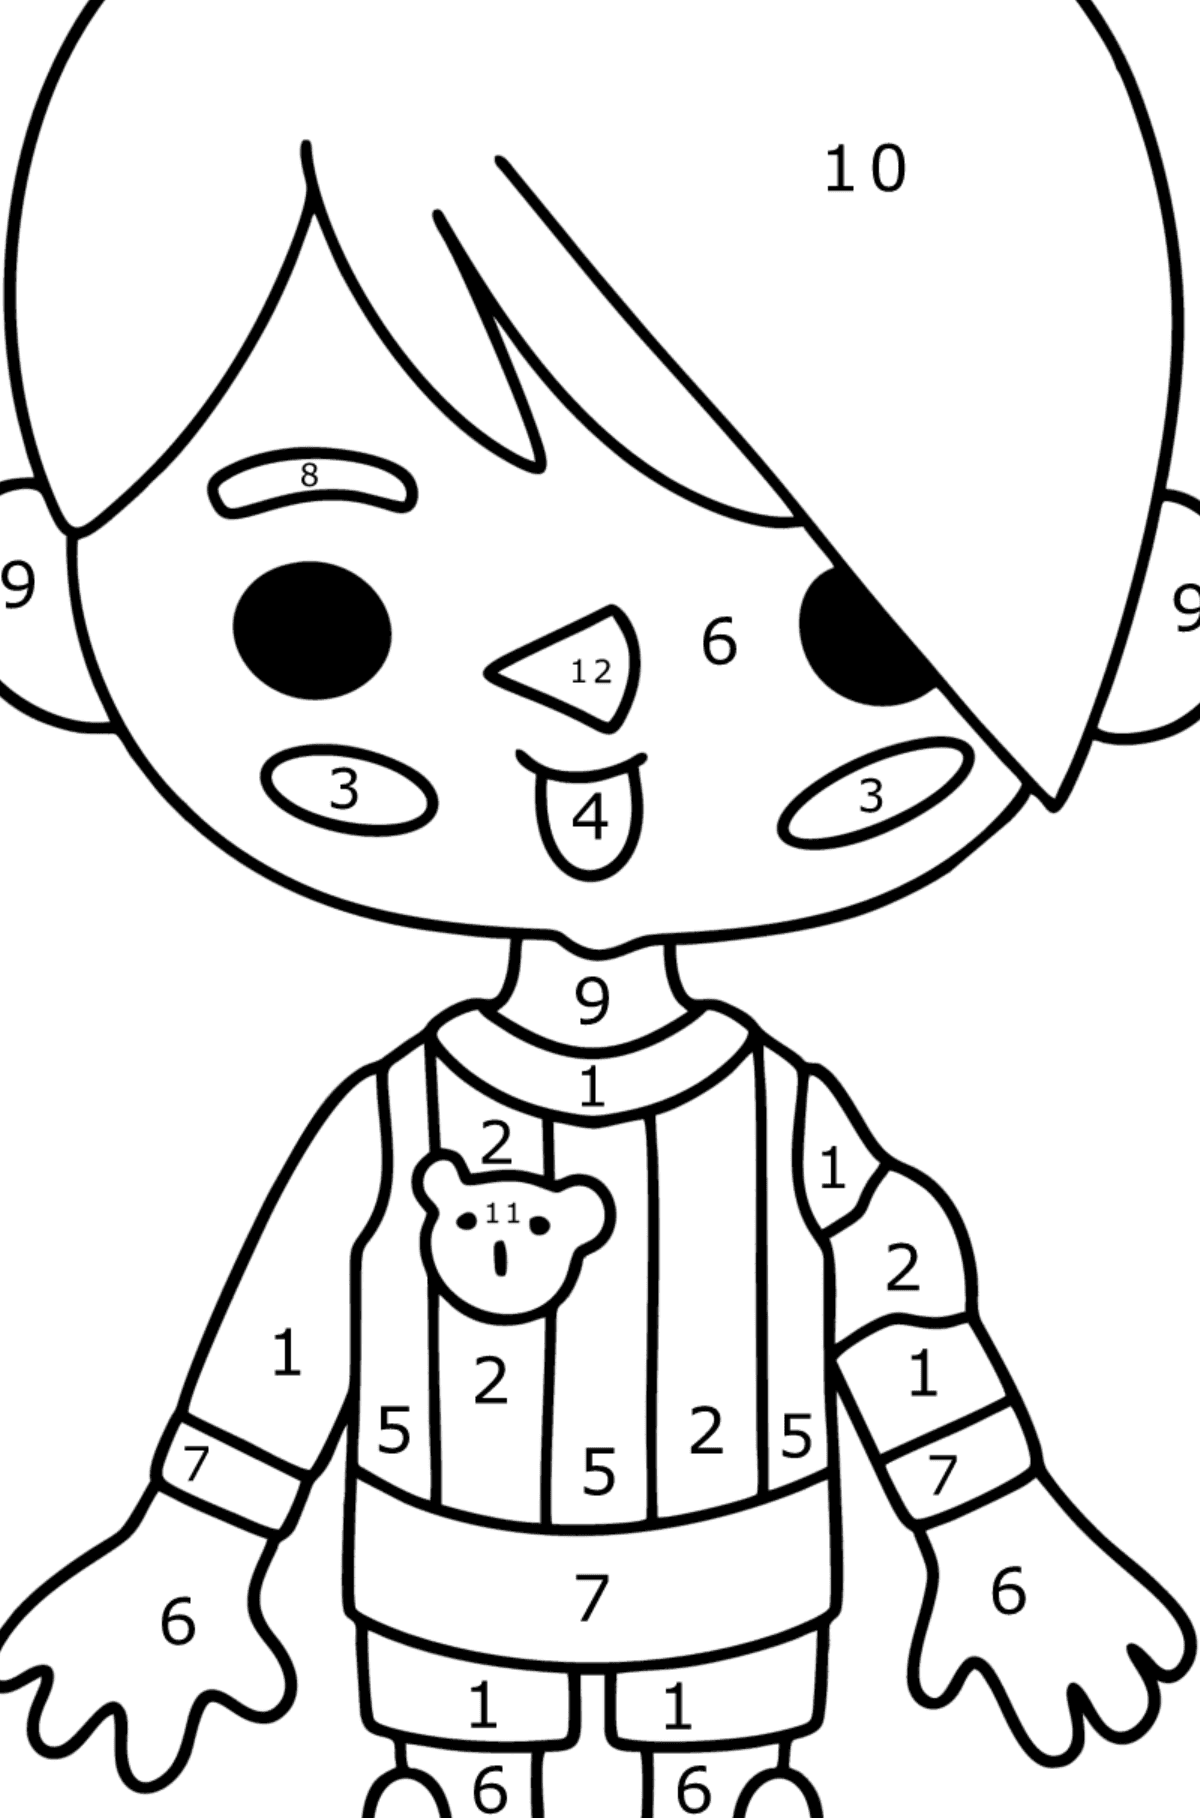 Coloring page Boy tocaboca 05 - Coloring by Numbers for Kids